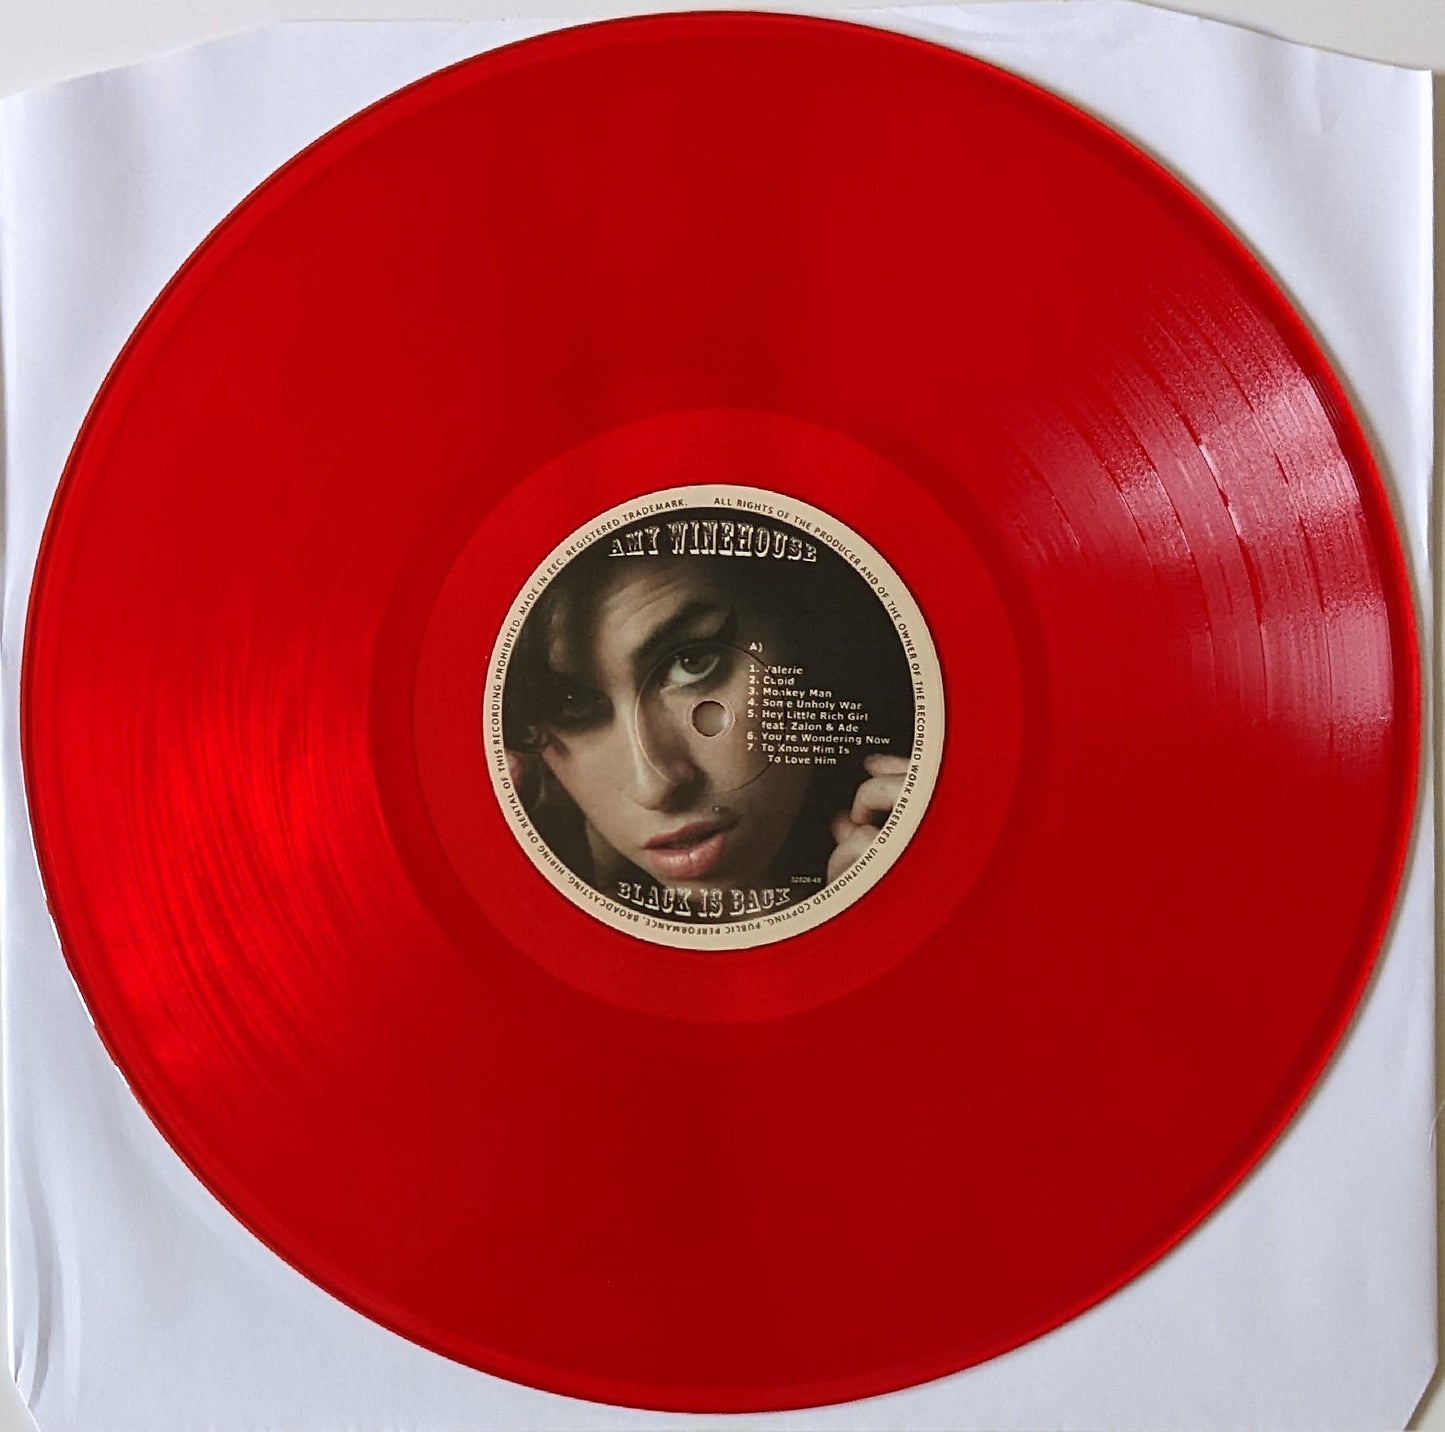 AMY WINEHOUSE LP All My Lovin' (Shade Red Clear Coloured Vinyl)